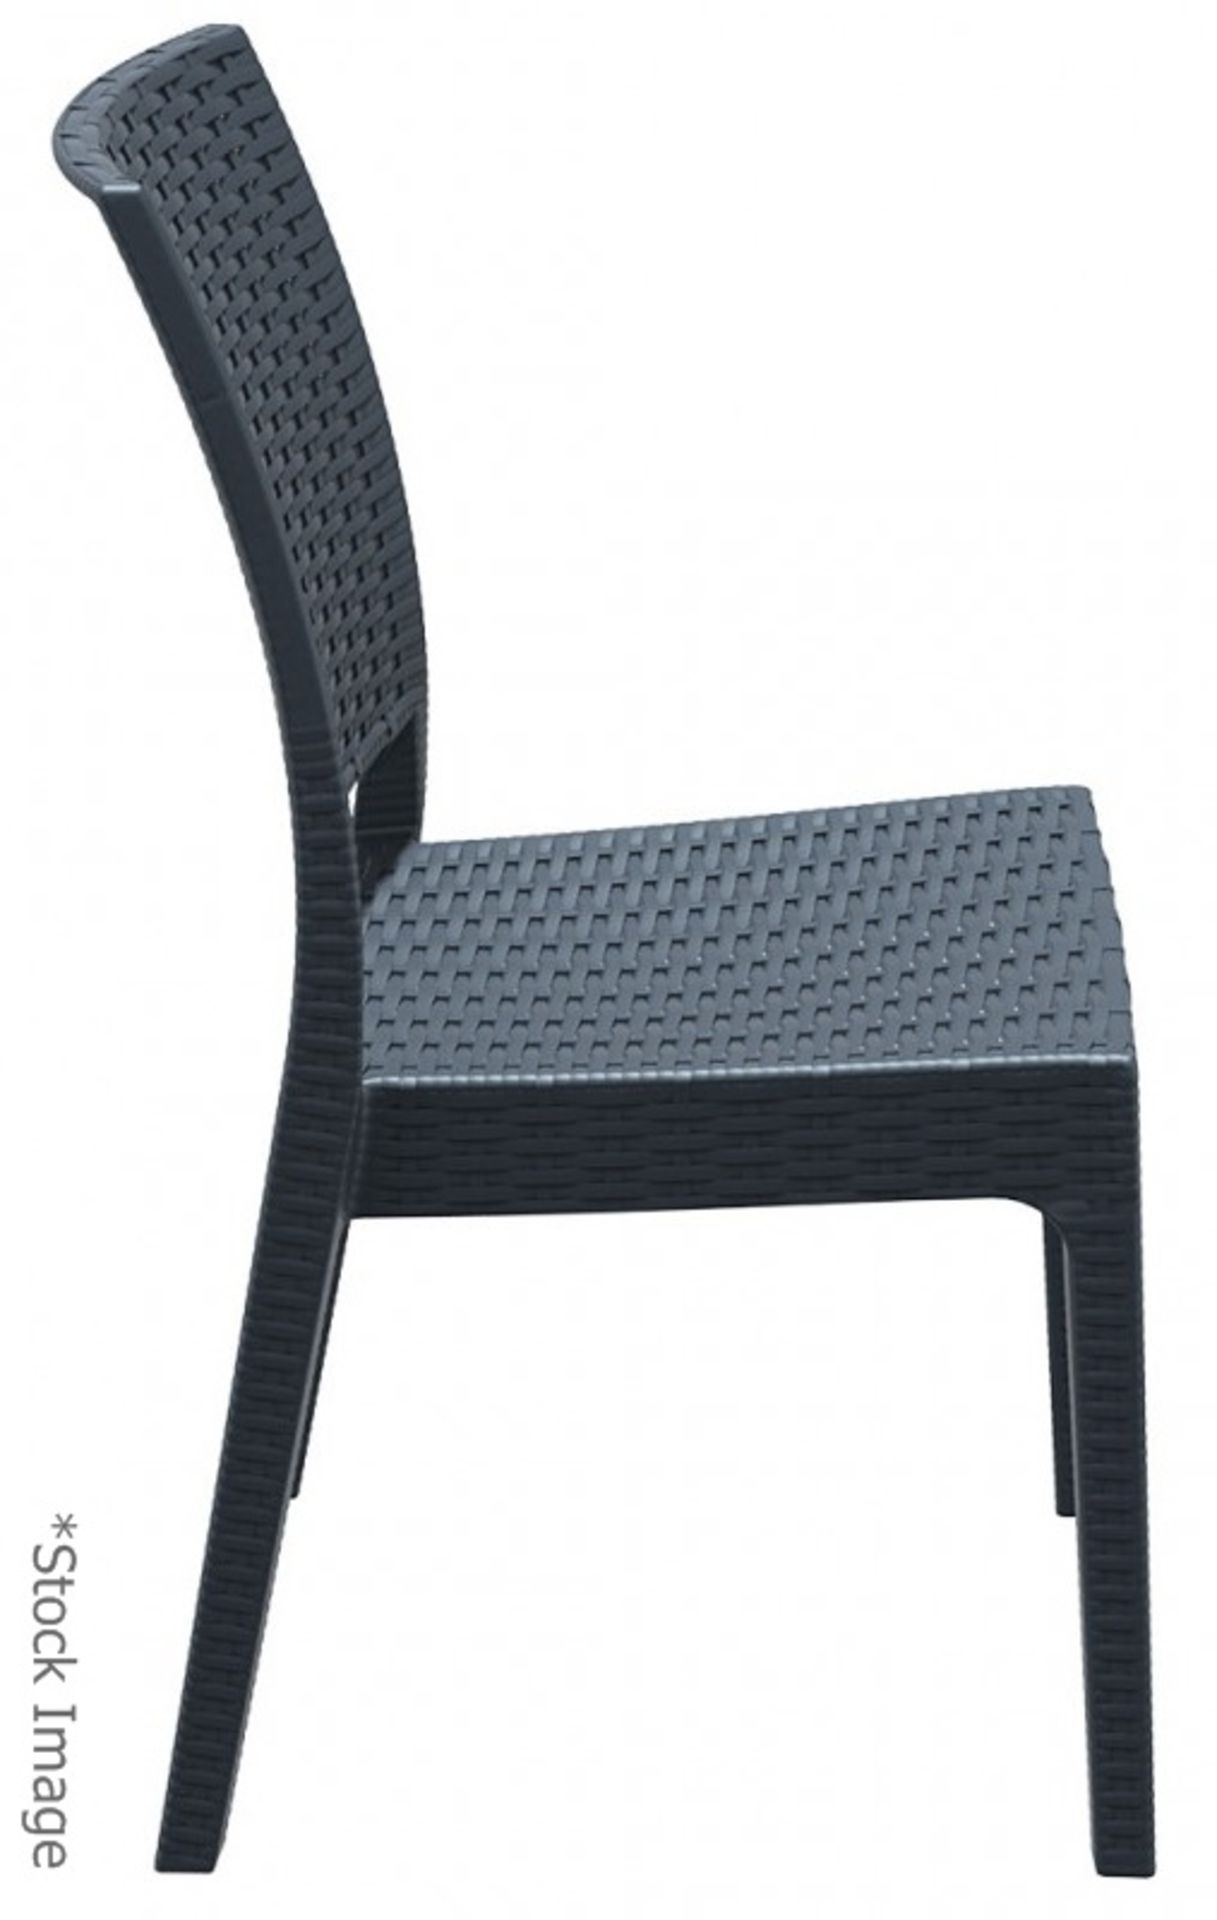 4 x Siesta 'Florida' Rattan Style Garden Chairs In Dark Grey - Suitable For Commercial or Home Use - - Image 12 of 14